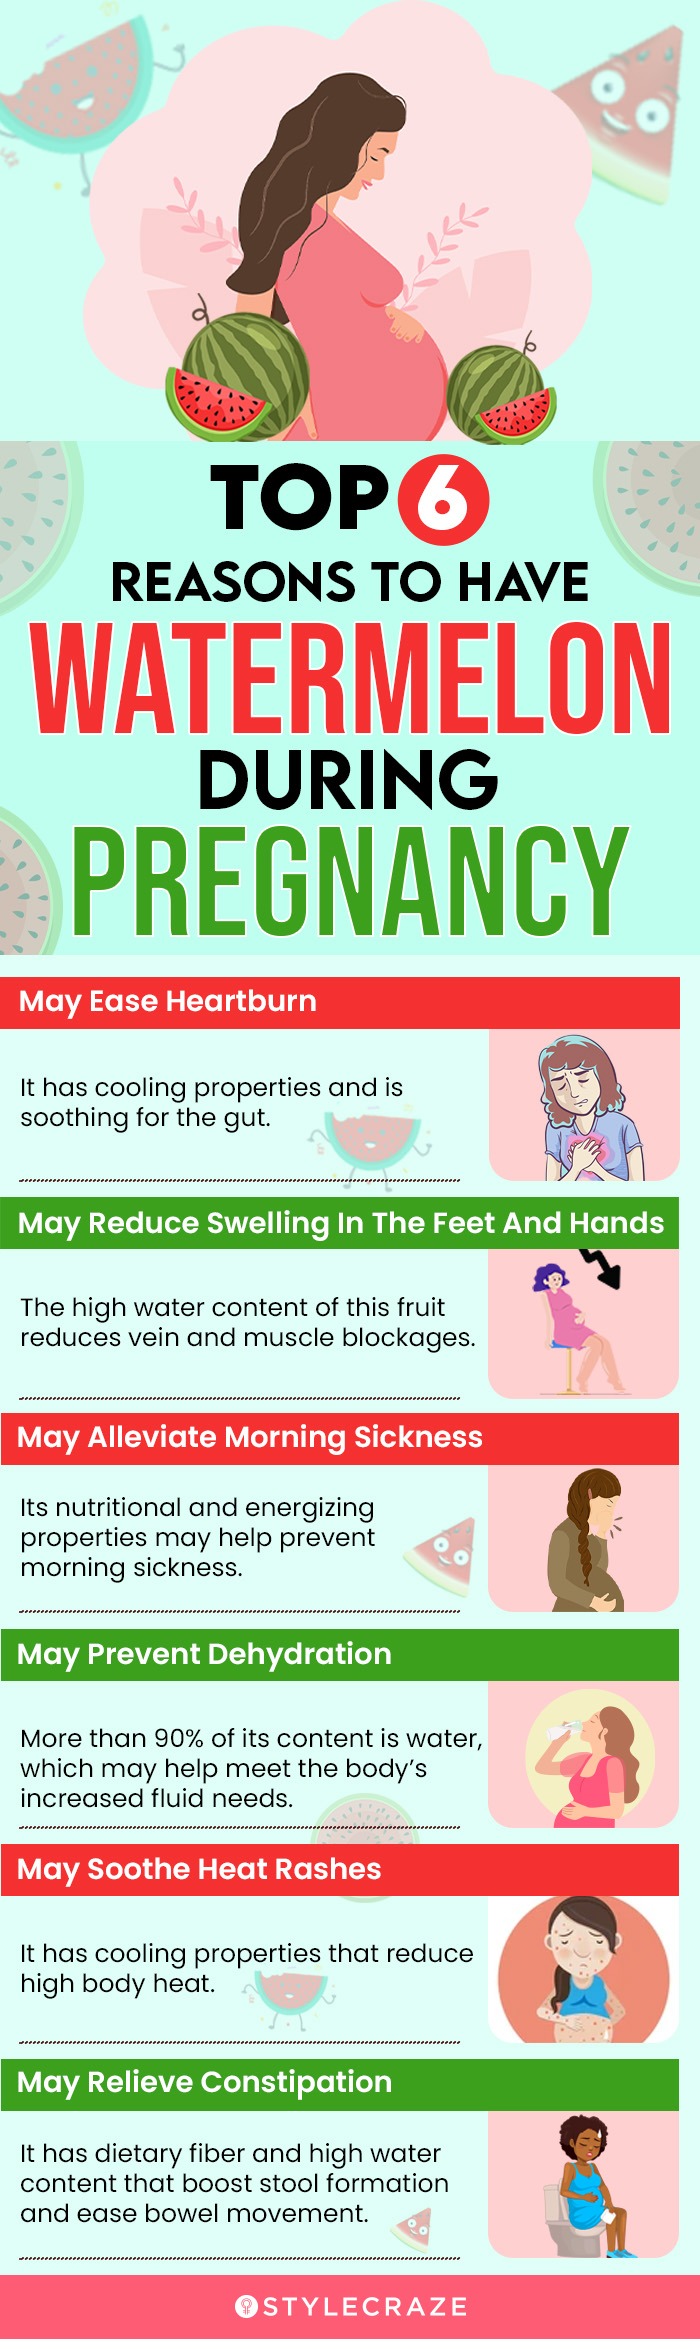 top 6 reasons to have watermelon during pregnancy [infographic]